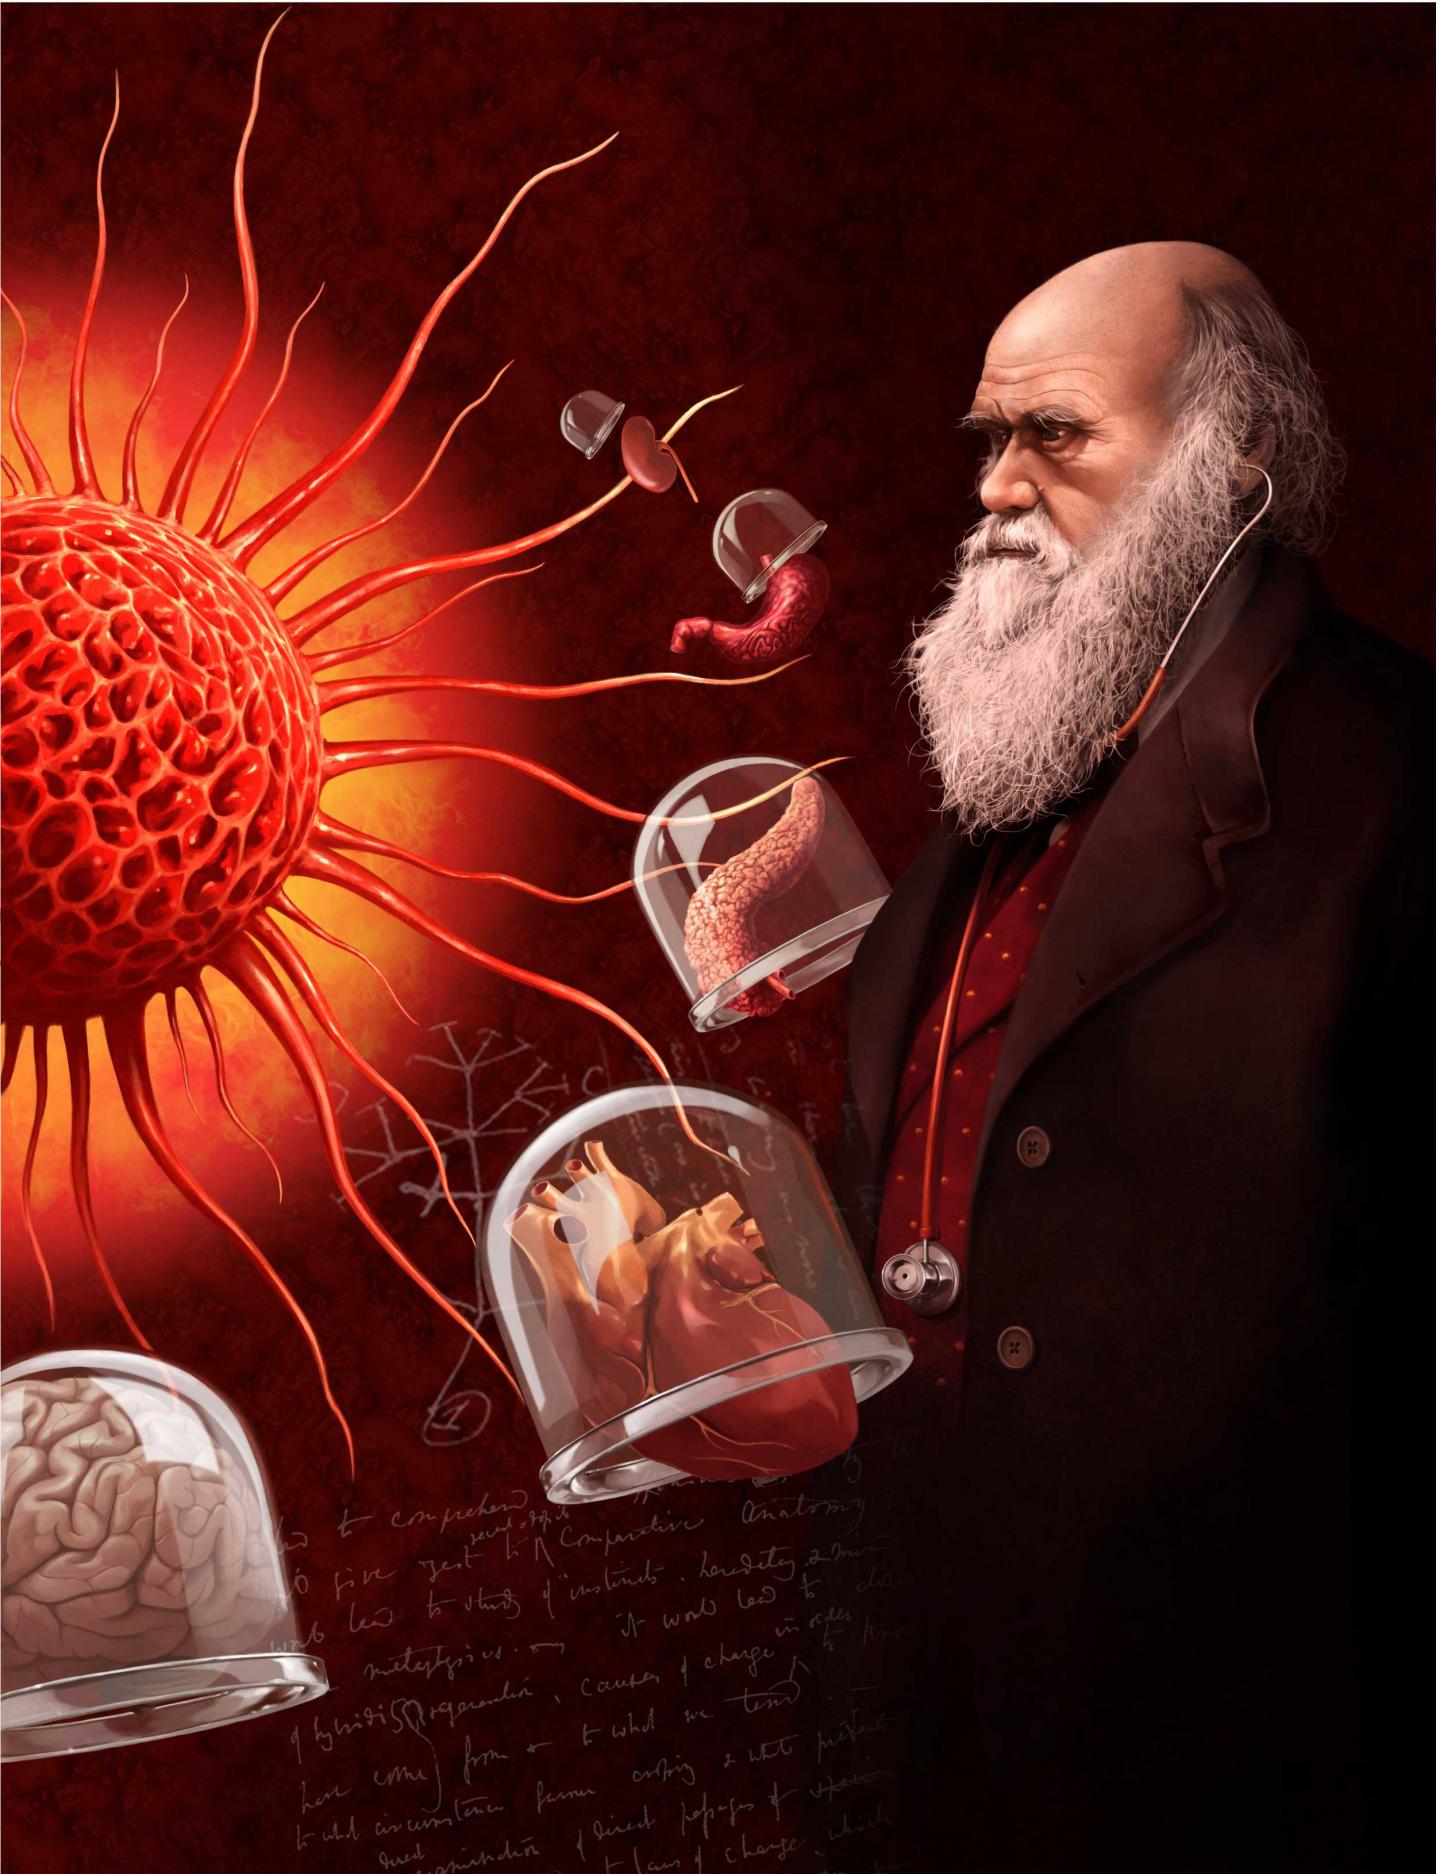 Cancer and Darwinian Fitness